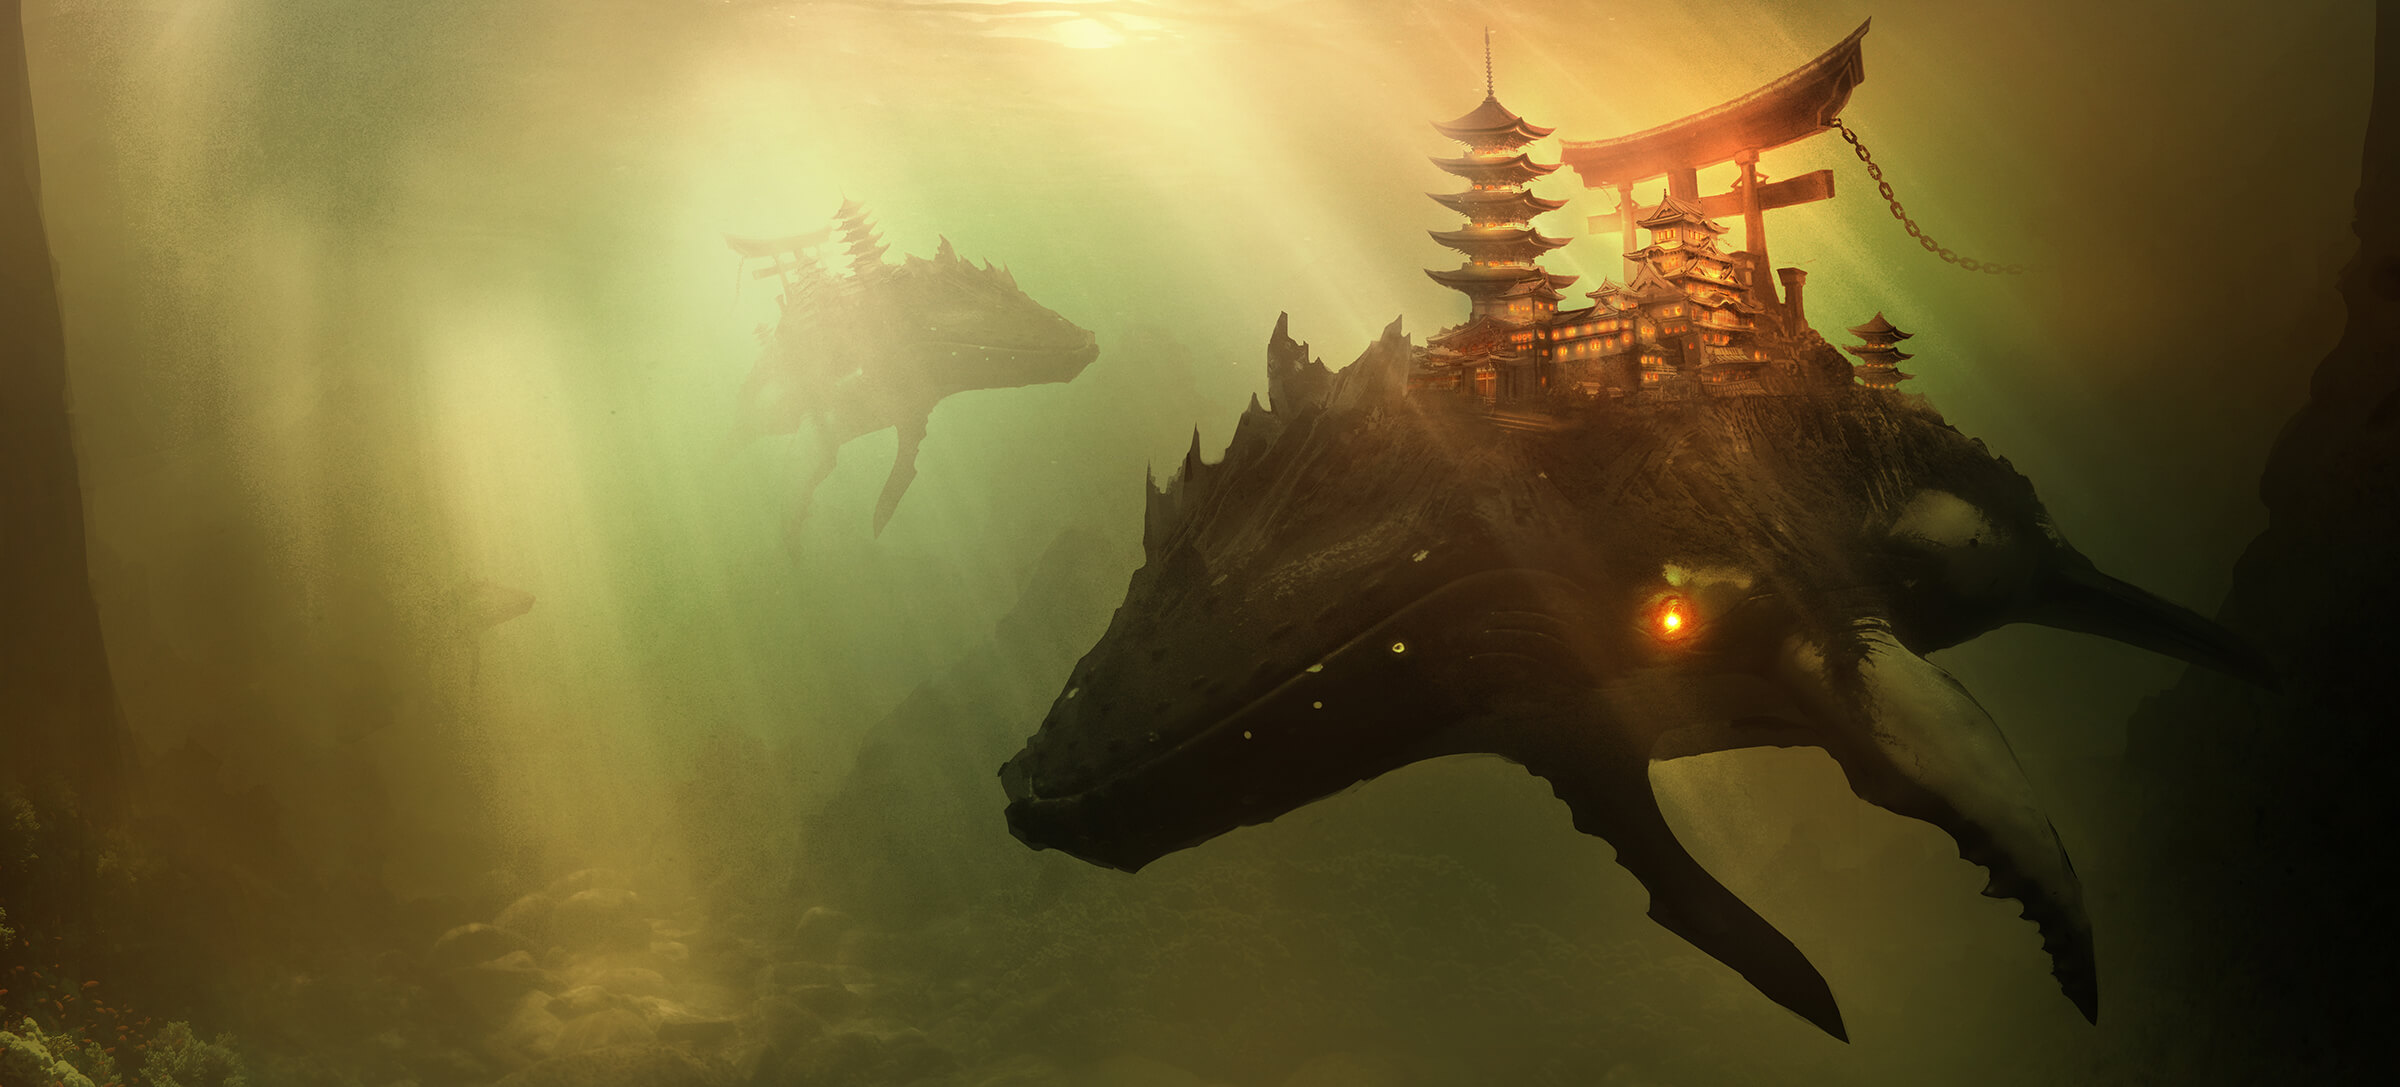 Whales swim through murky, rocky water, carrying pagoda-style castles and torii gates on their back.